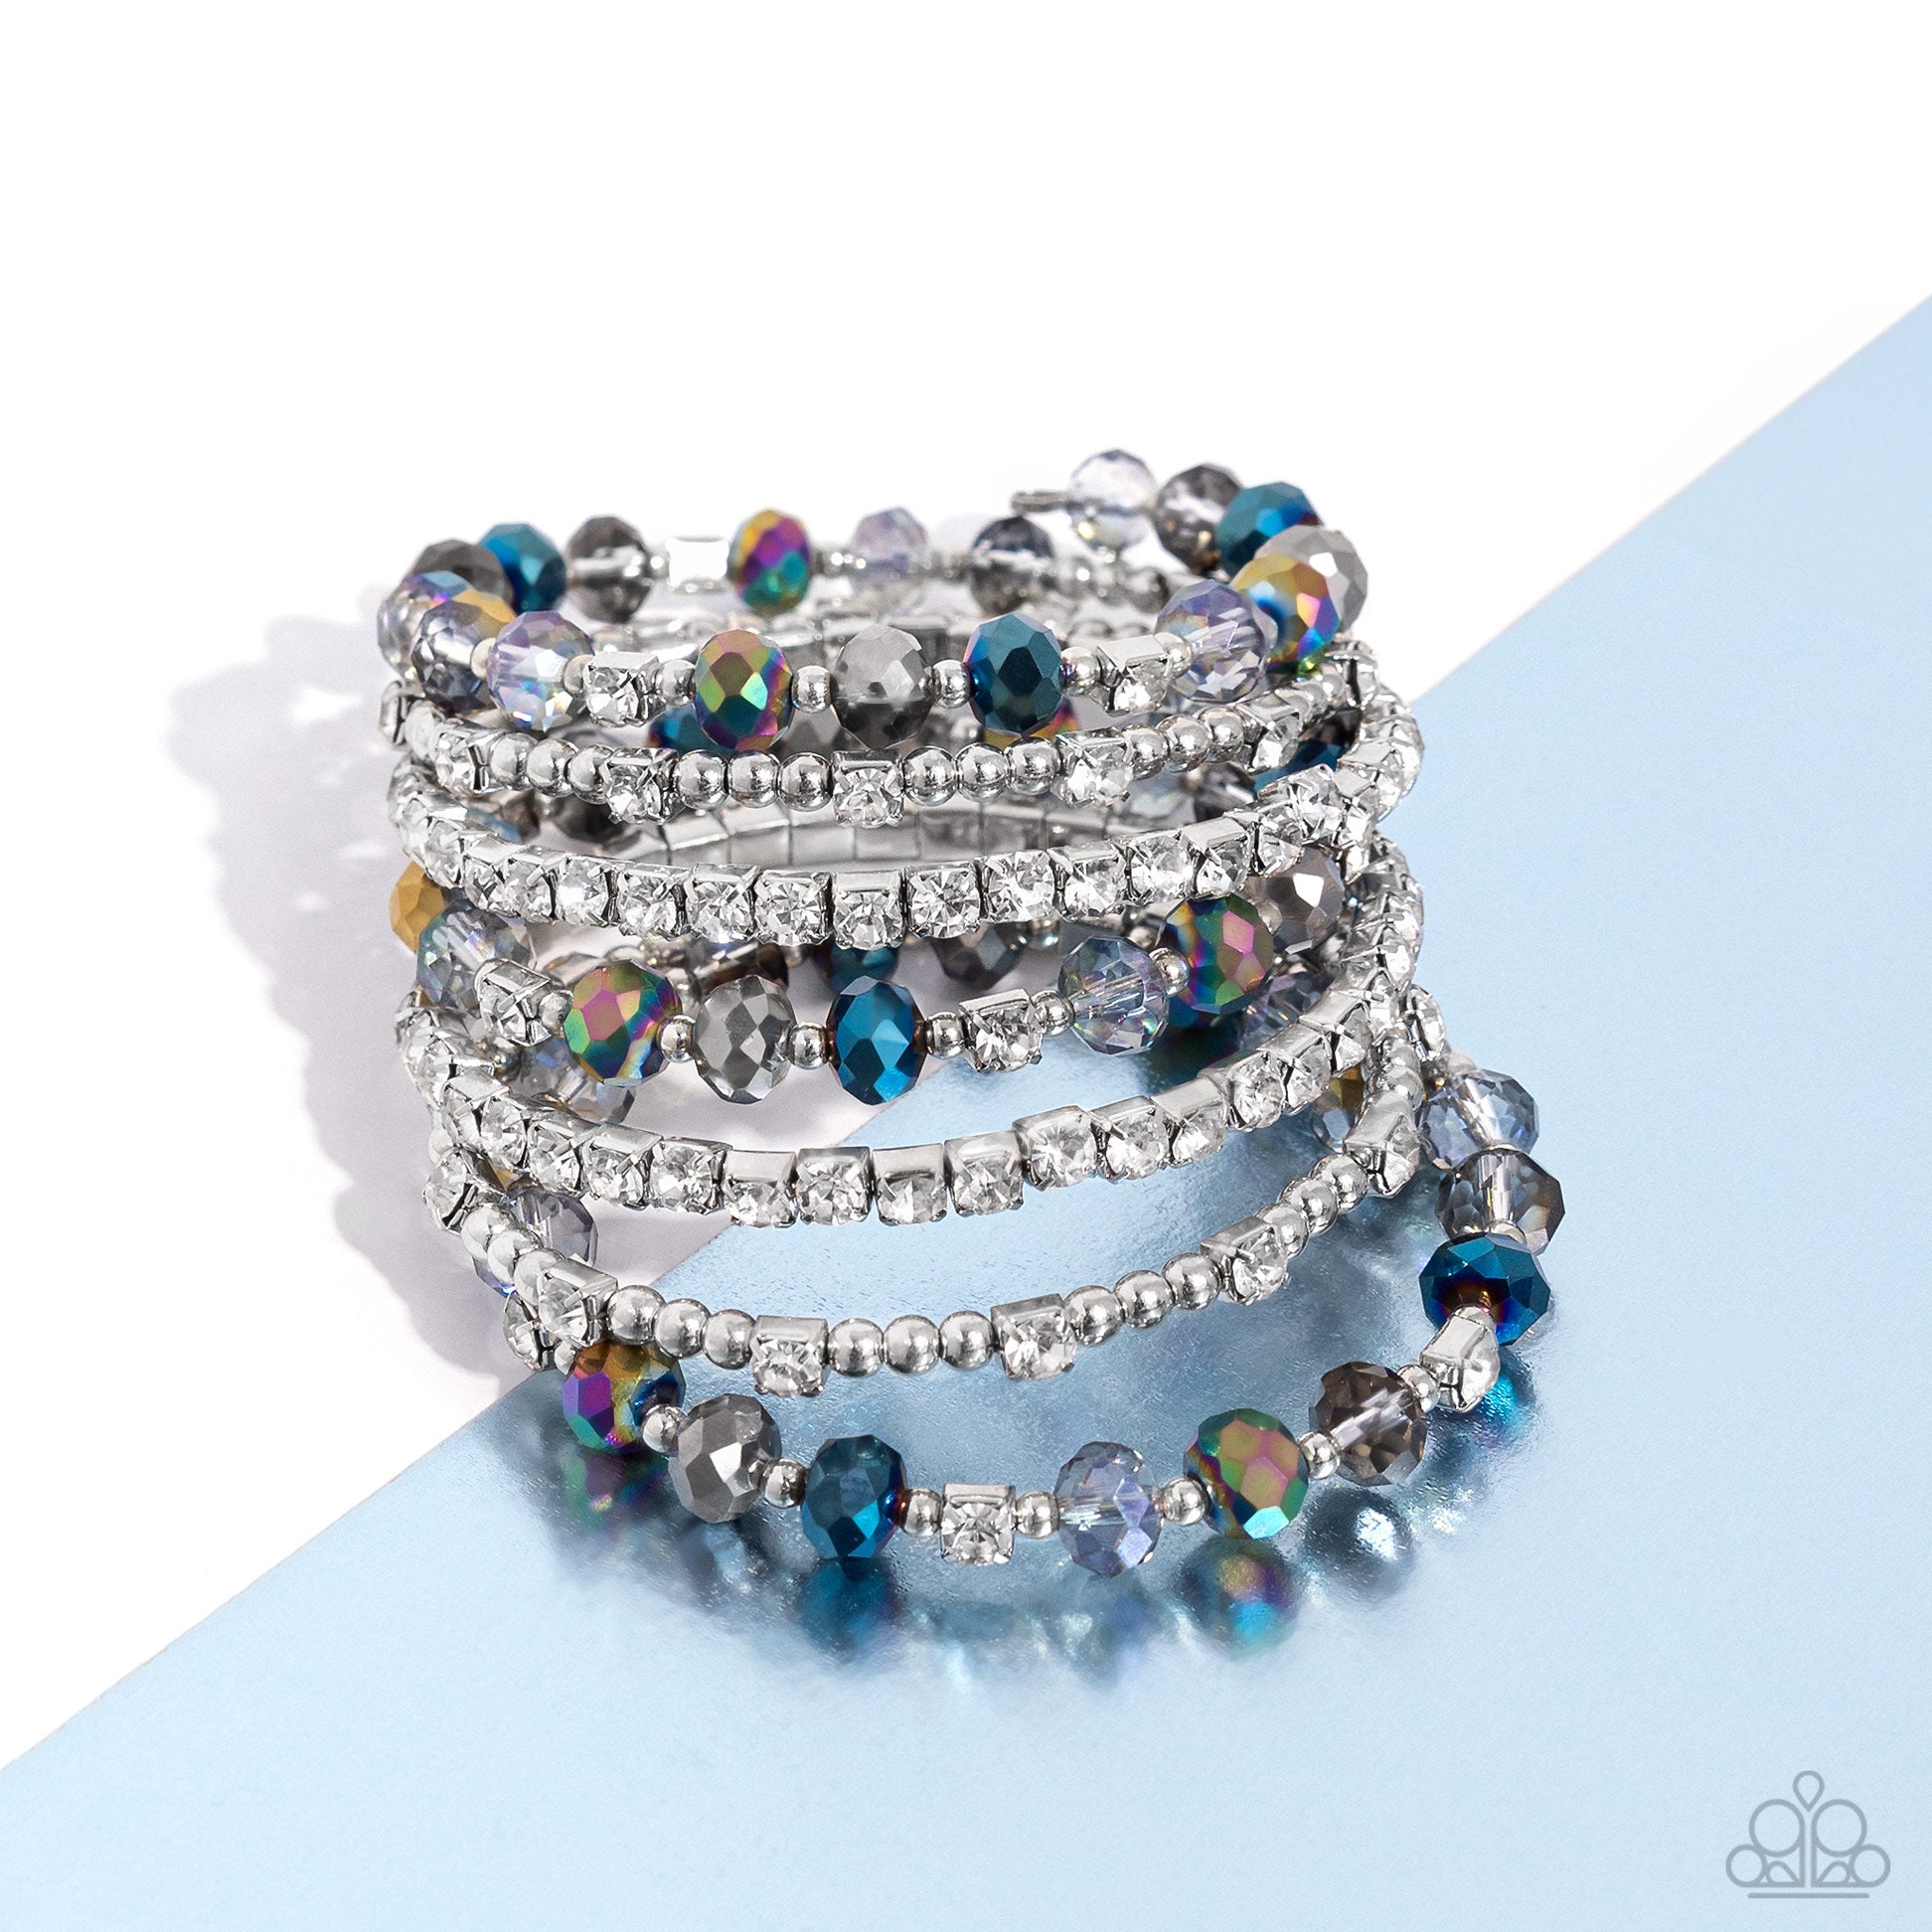 <p>Paparazzi Accessories - Sizzling Stack - Multi Bracelets threaded along a coiled wire, silver beads, white rhinestones in silver square fittings, and oil spill, blue, silver, and transparent faceted beads curl around the wrist, creating an eye-catching, infinity wrap-style bracelet around the wrist.</p> <p><i>Sold as one individual bracelet.</i></p>